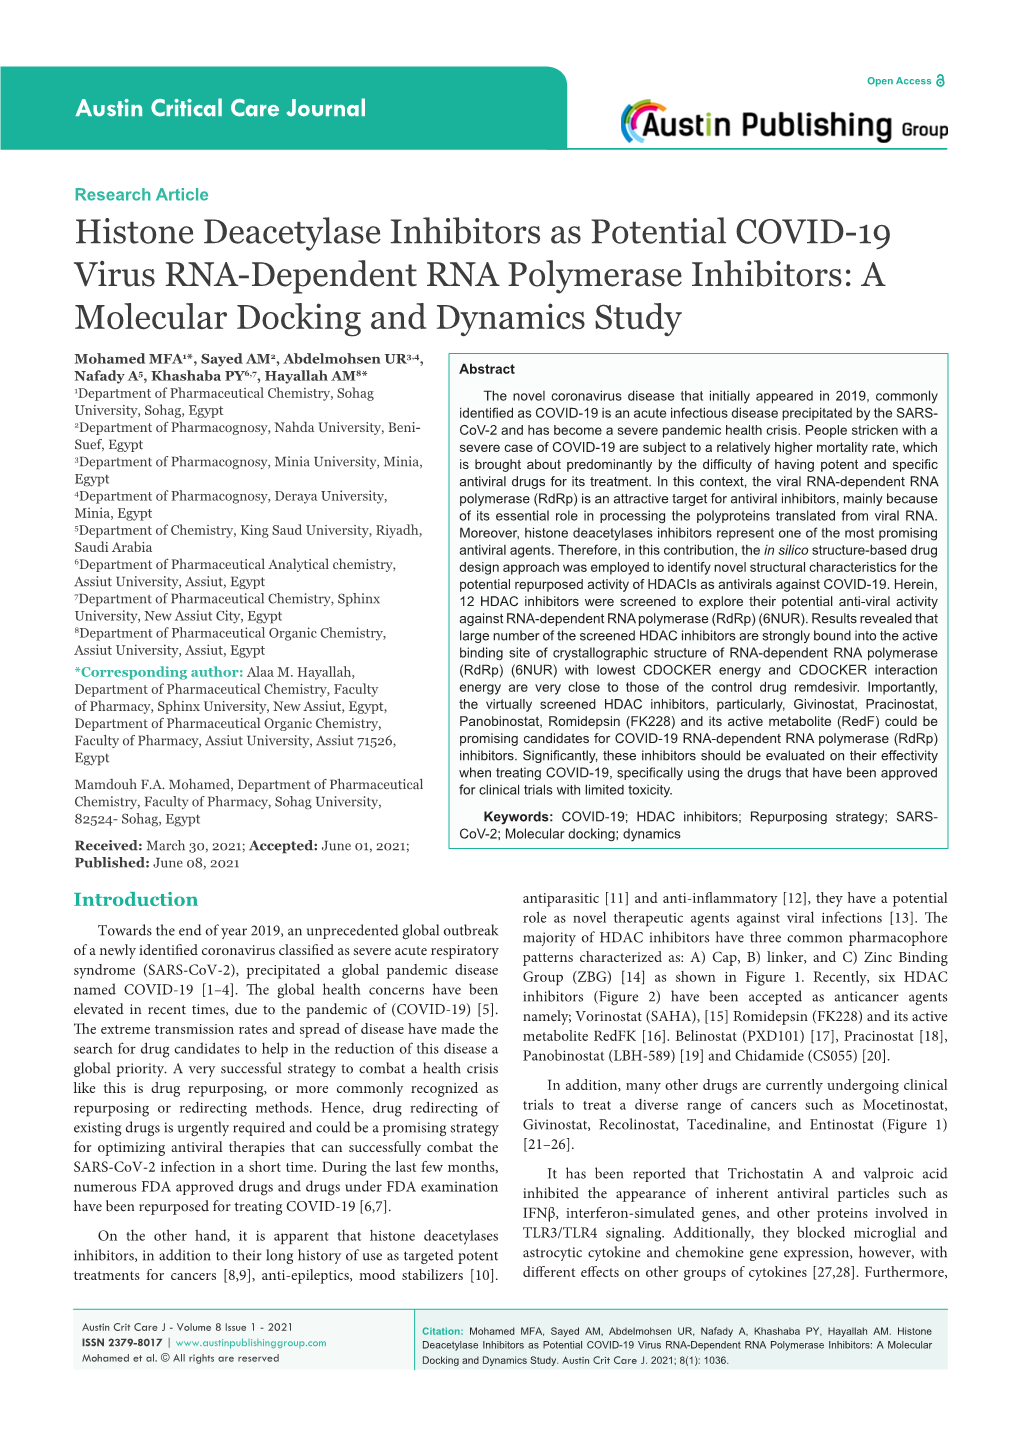 Histone Deacetylase Inhibitors As Potential COVID-19 Virus RNA-Dependent RNA Polymerase Inhibitors: a Molecular Docking and Dynamics Study